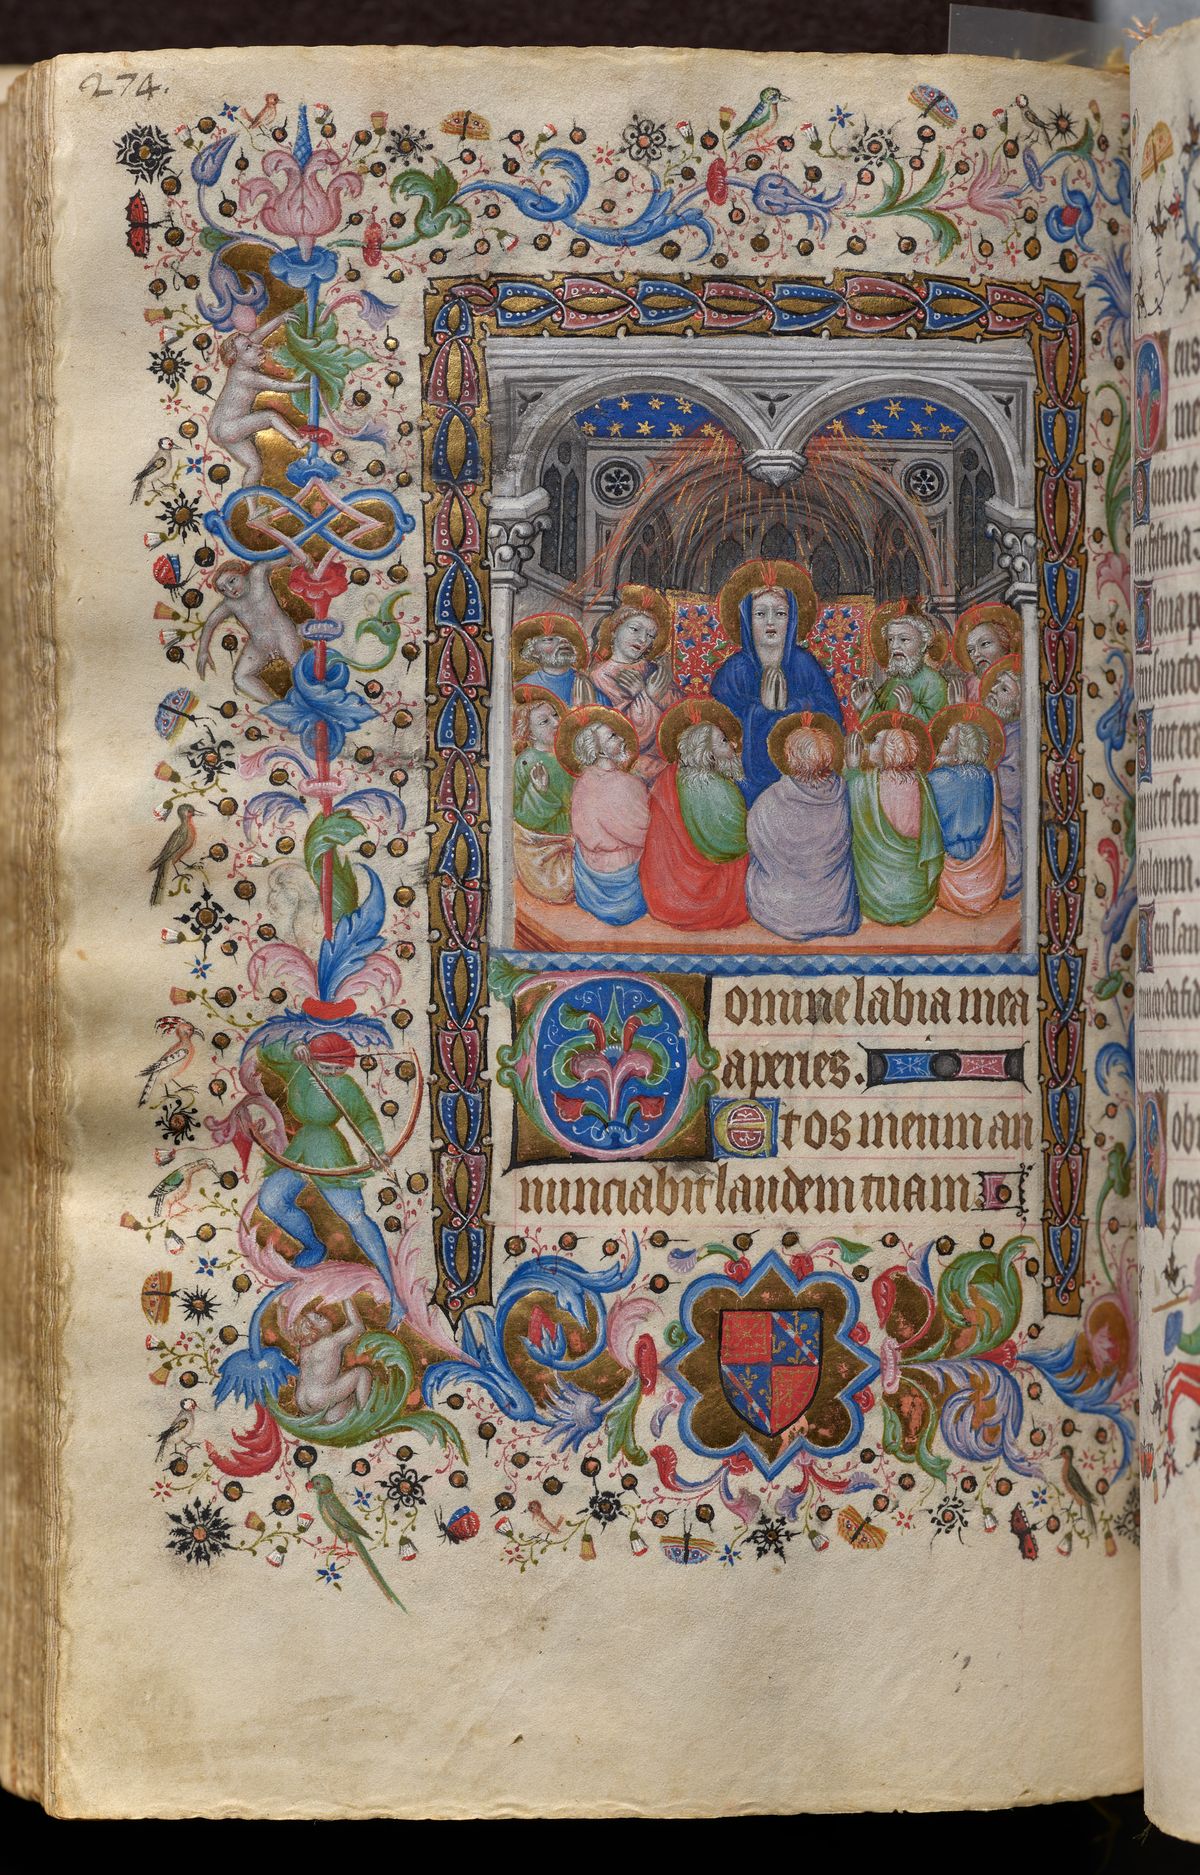 Hours of Charles the Noble, King of Navarre (1361-1425): fol. 137v, Pentecost (1405) by Master of the Brussels Initials and Associates - Public Domain Illuminated Manuscript